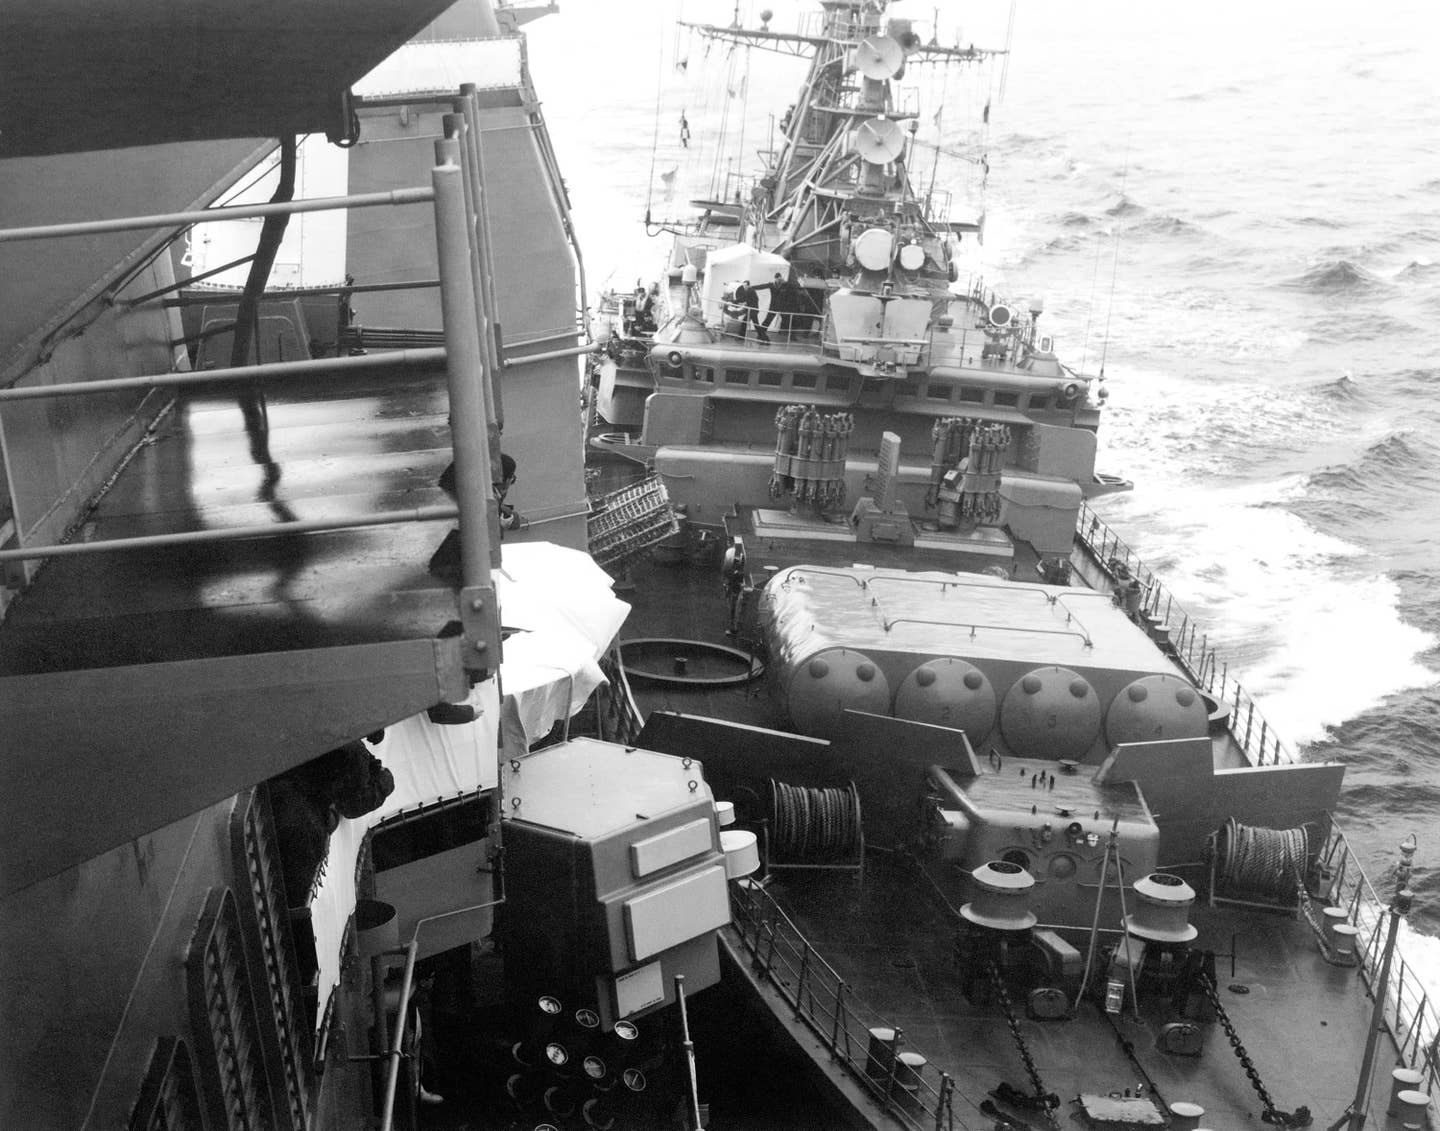 The Soviet Krivak I class guided missile frigate BEZZAVETNY (FFG 811) impacts the guided missile cruiser USS YORKTOWN (CG 48) as the American ship exercises the right of free passage through the Soviet-claimed 12-mile territorial waters. (U.S. Navy photo)